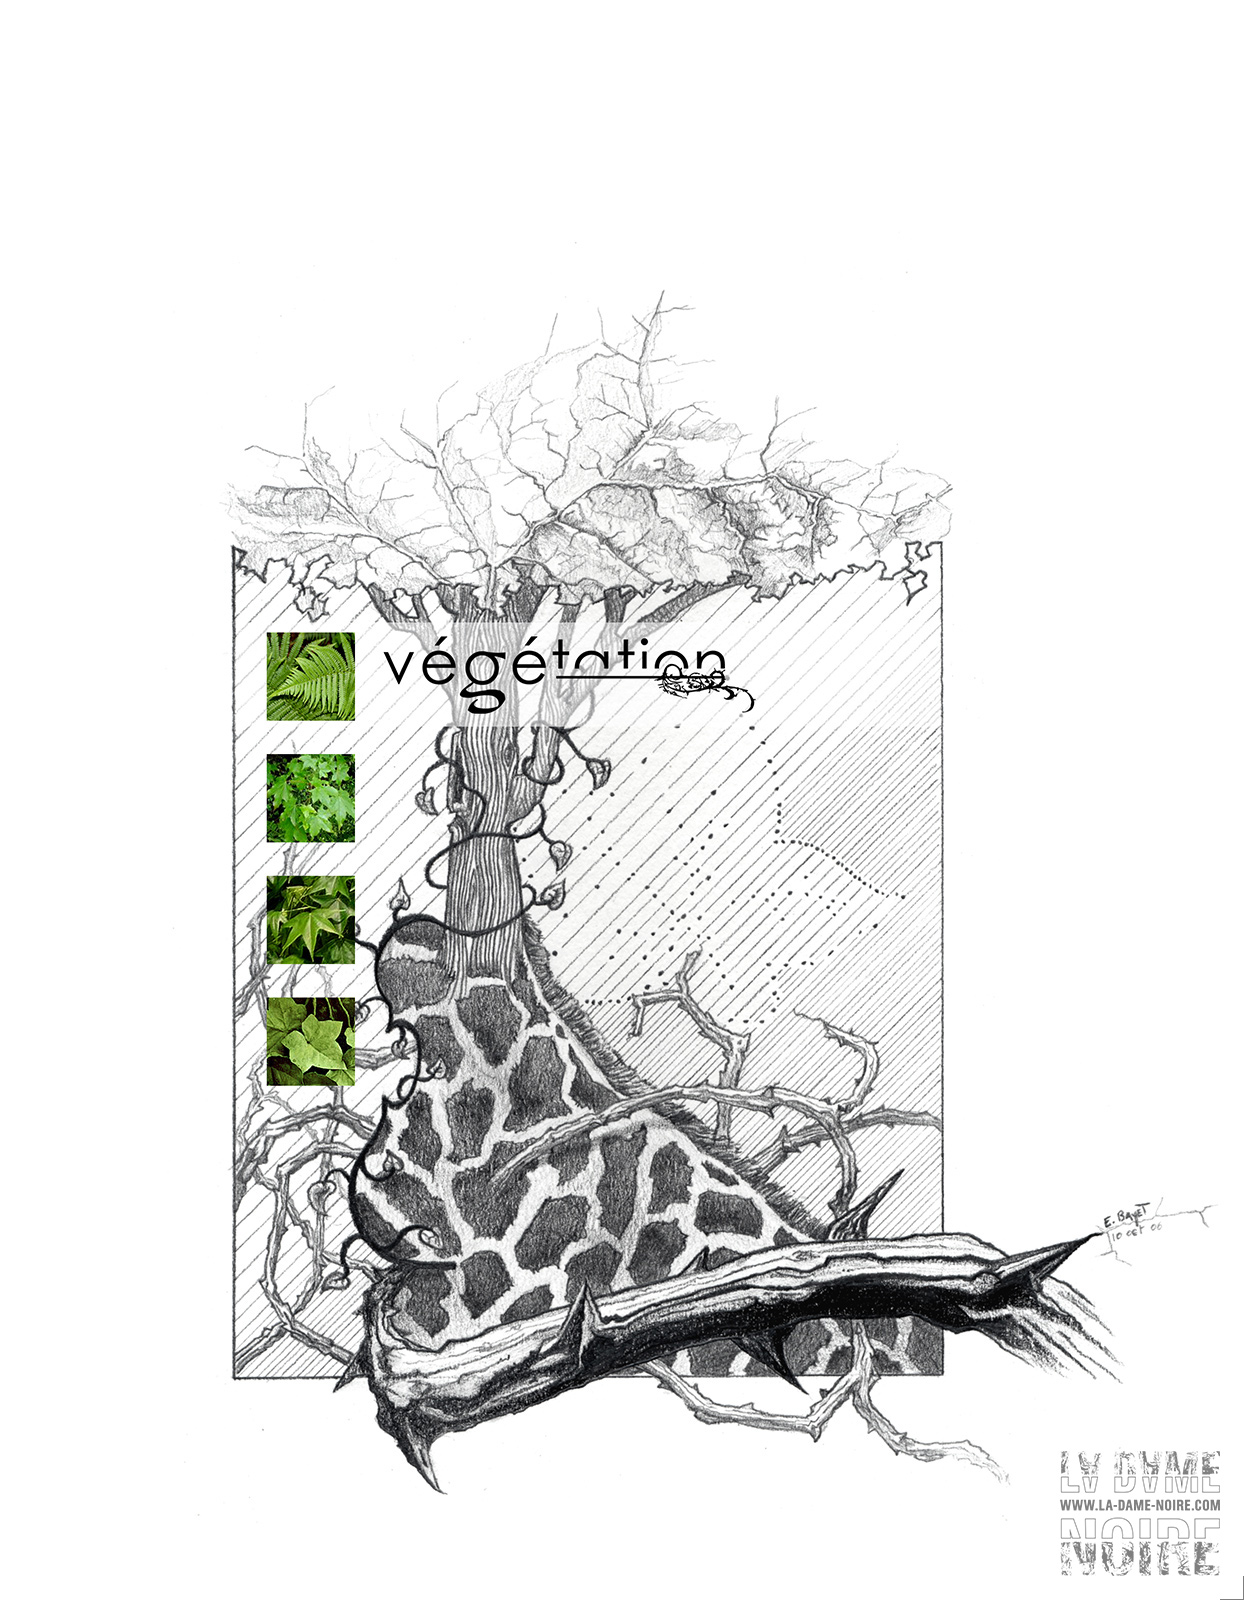 Illustration with vegetal and animal textures